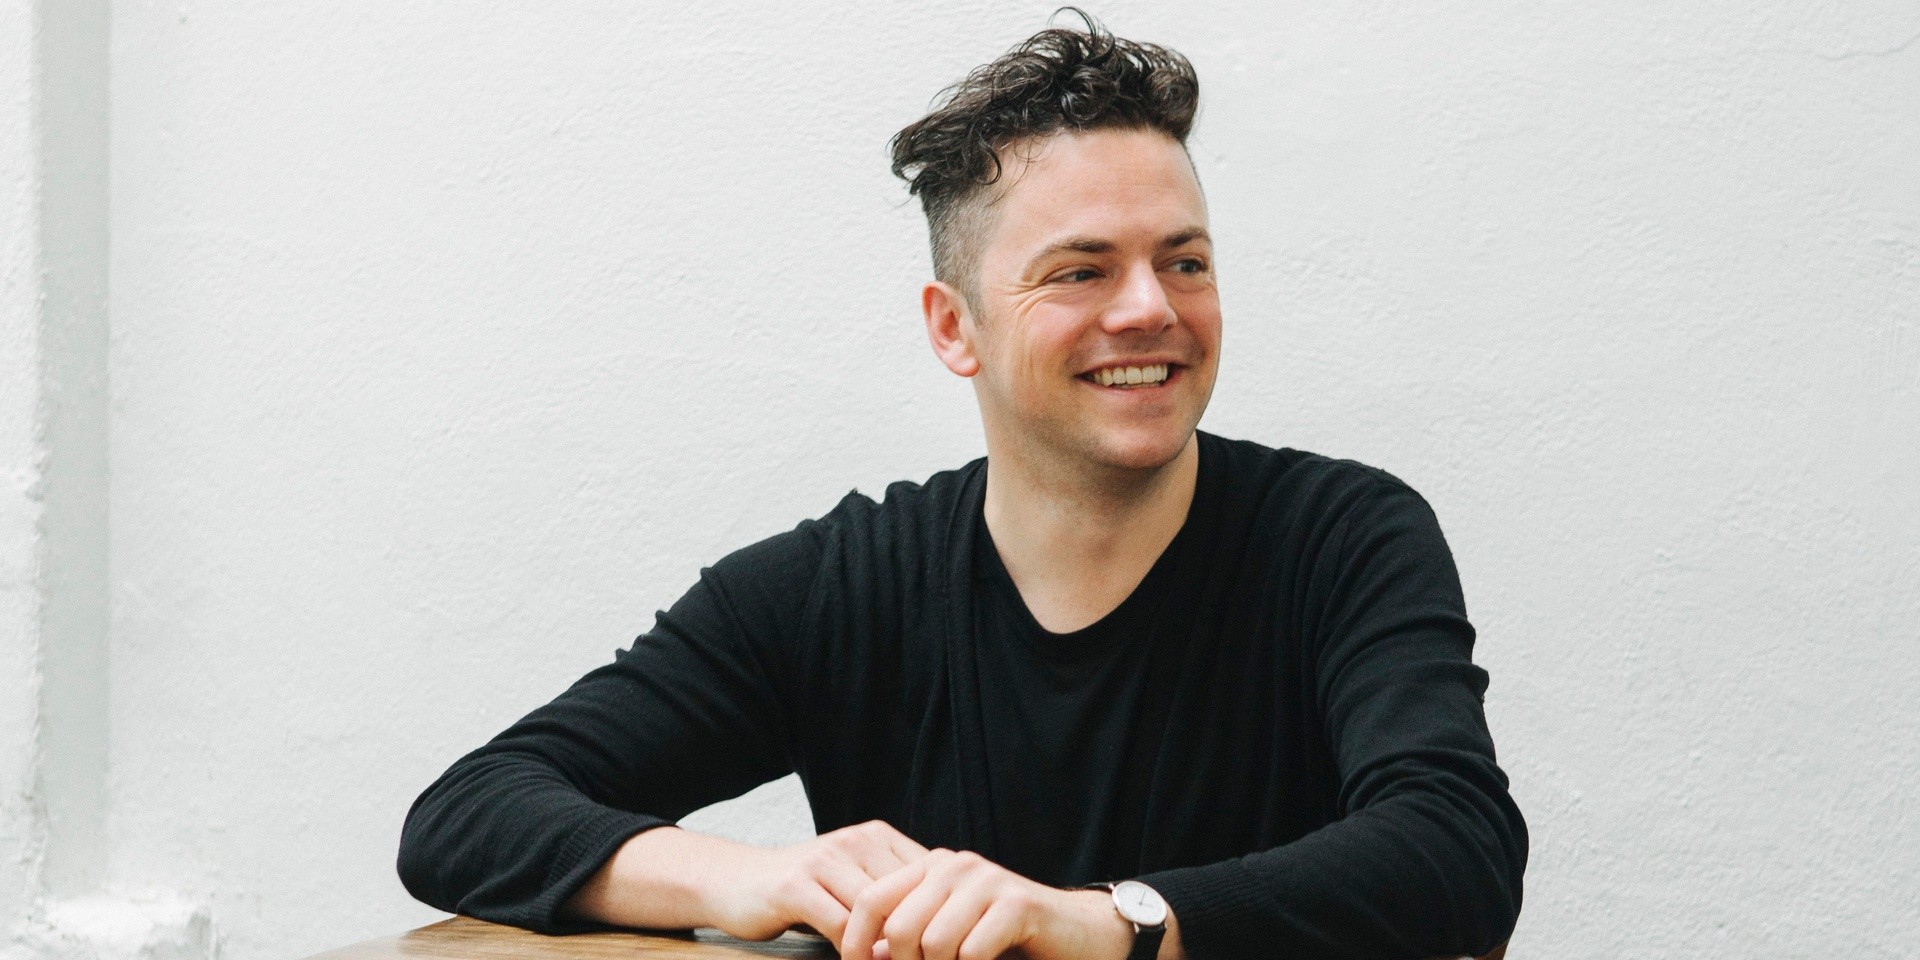 Speaking volumes with Nico Muhly about his creative process, saying no to projects and Philip Glass as a "musical citizen"